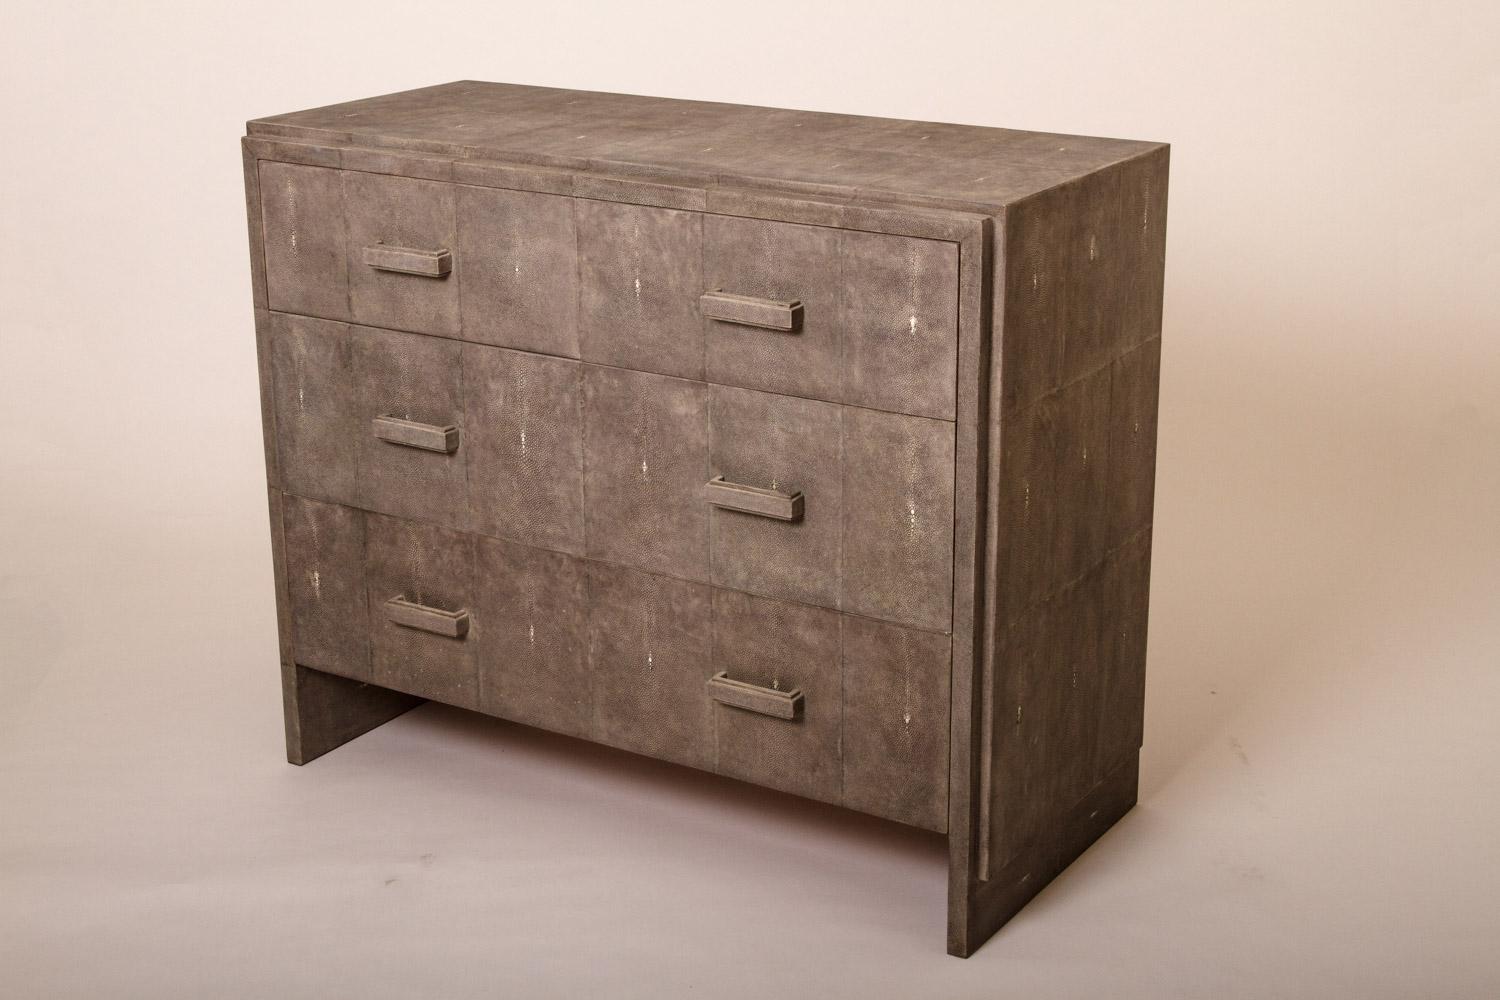 The Tomboy chest of drawers in coal black shagreen is a Classic piece that would suit any living style. The simplicity of the piece allows for the rich shagreen inlay to speak for itself. This chest is extremely piratical including 2 drawers on the